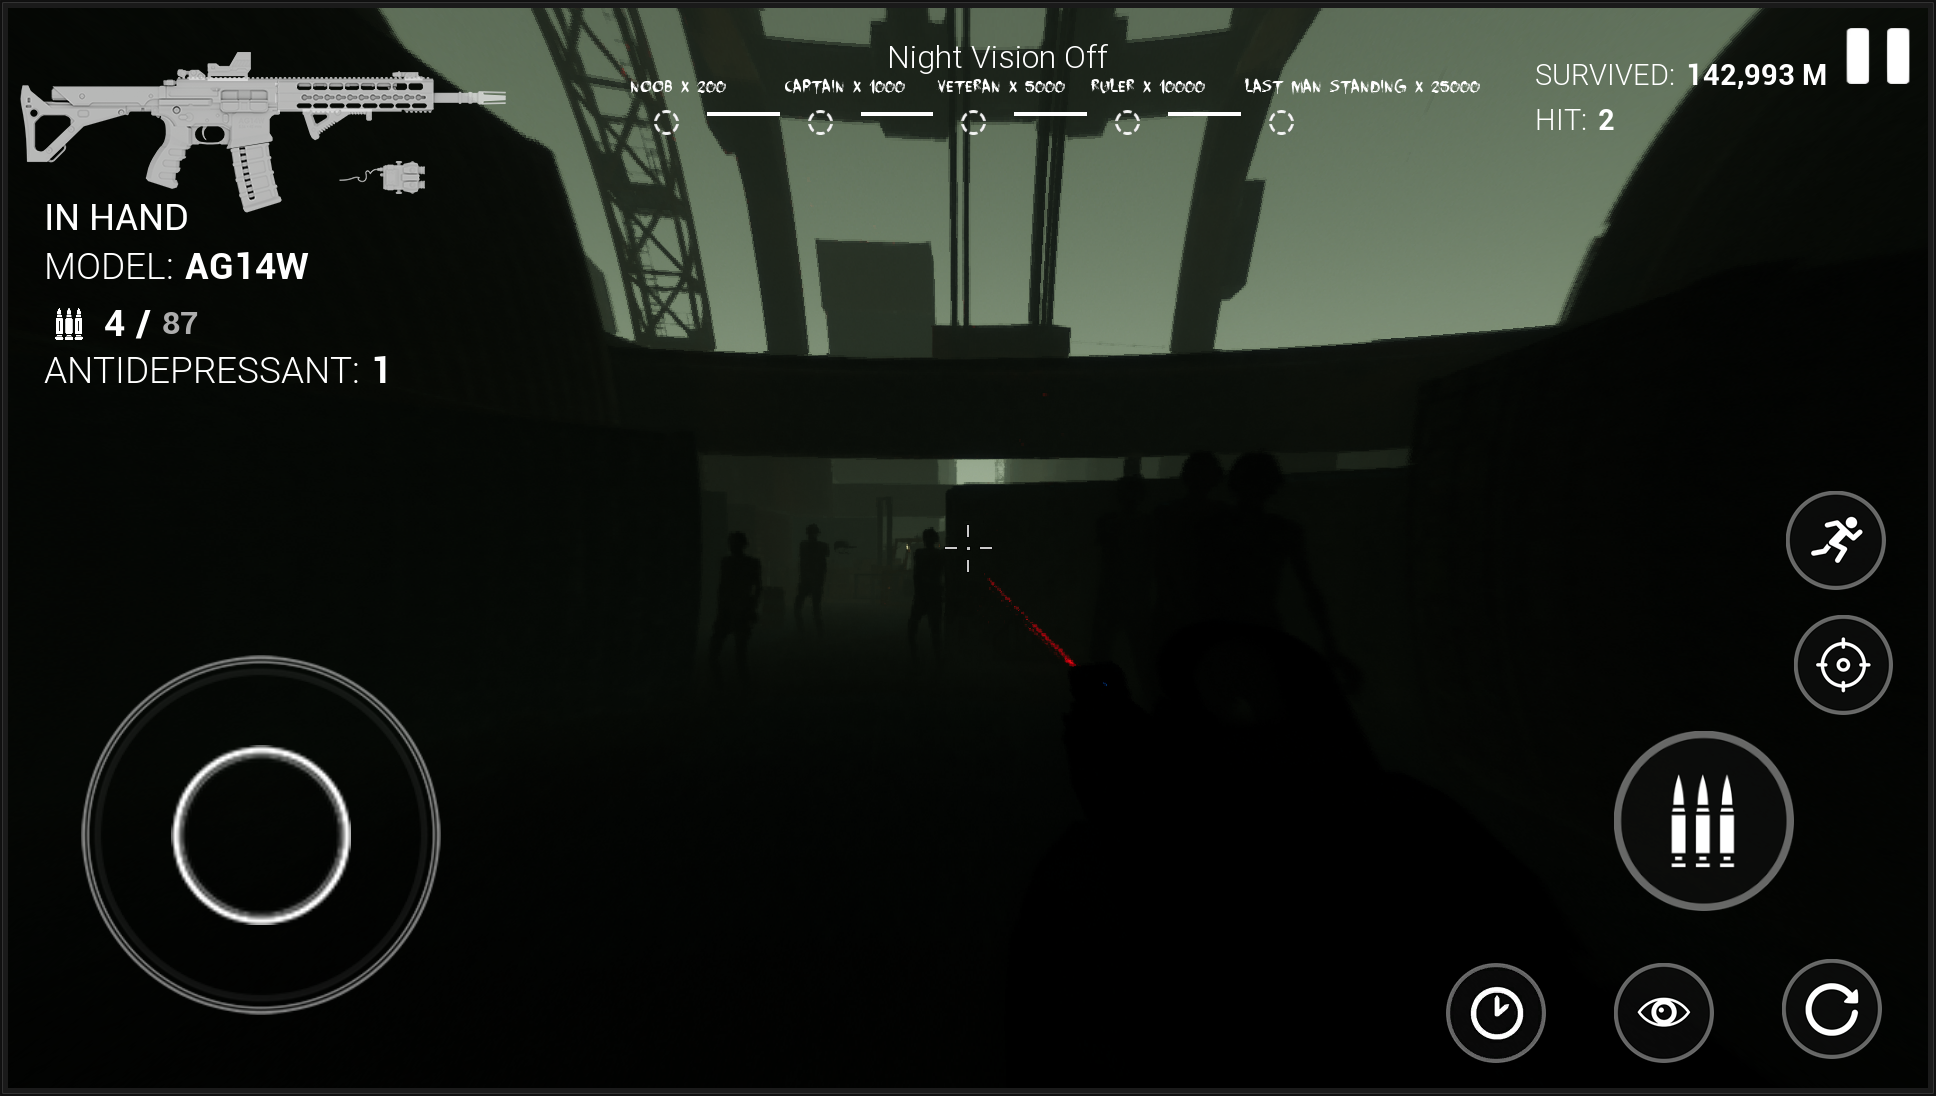 Prion: Infection screenshot game